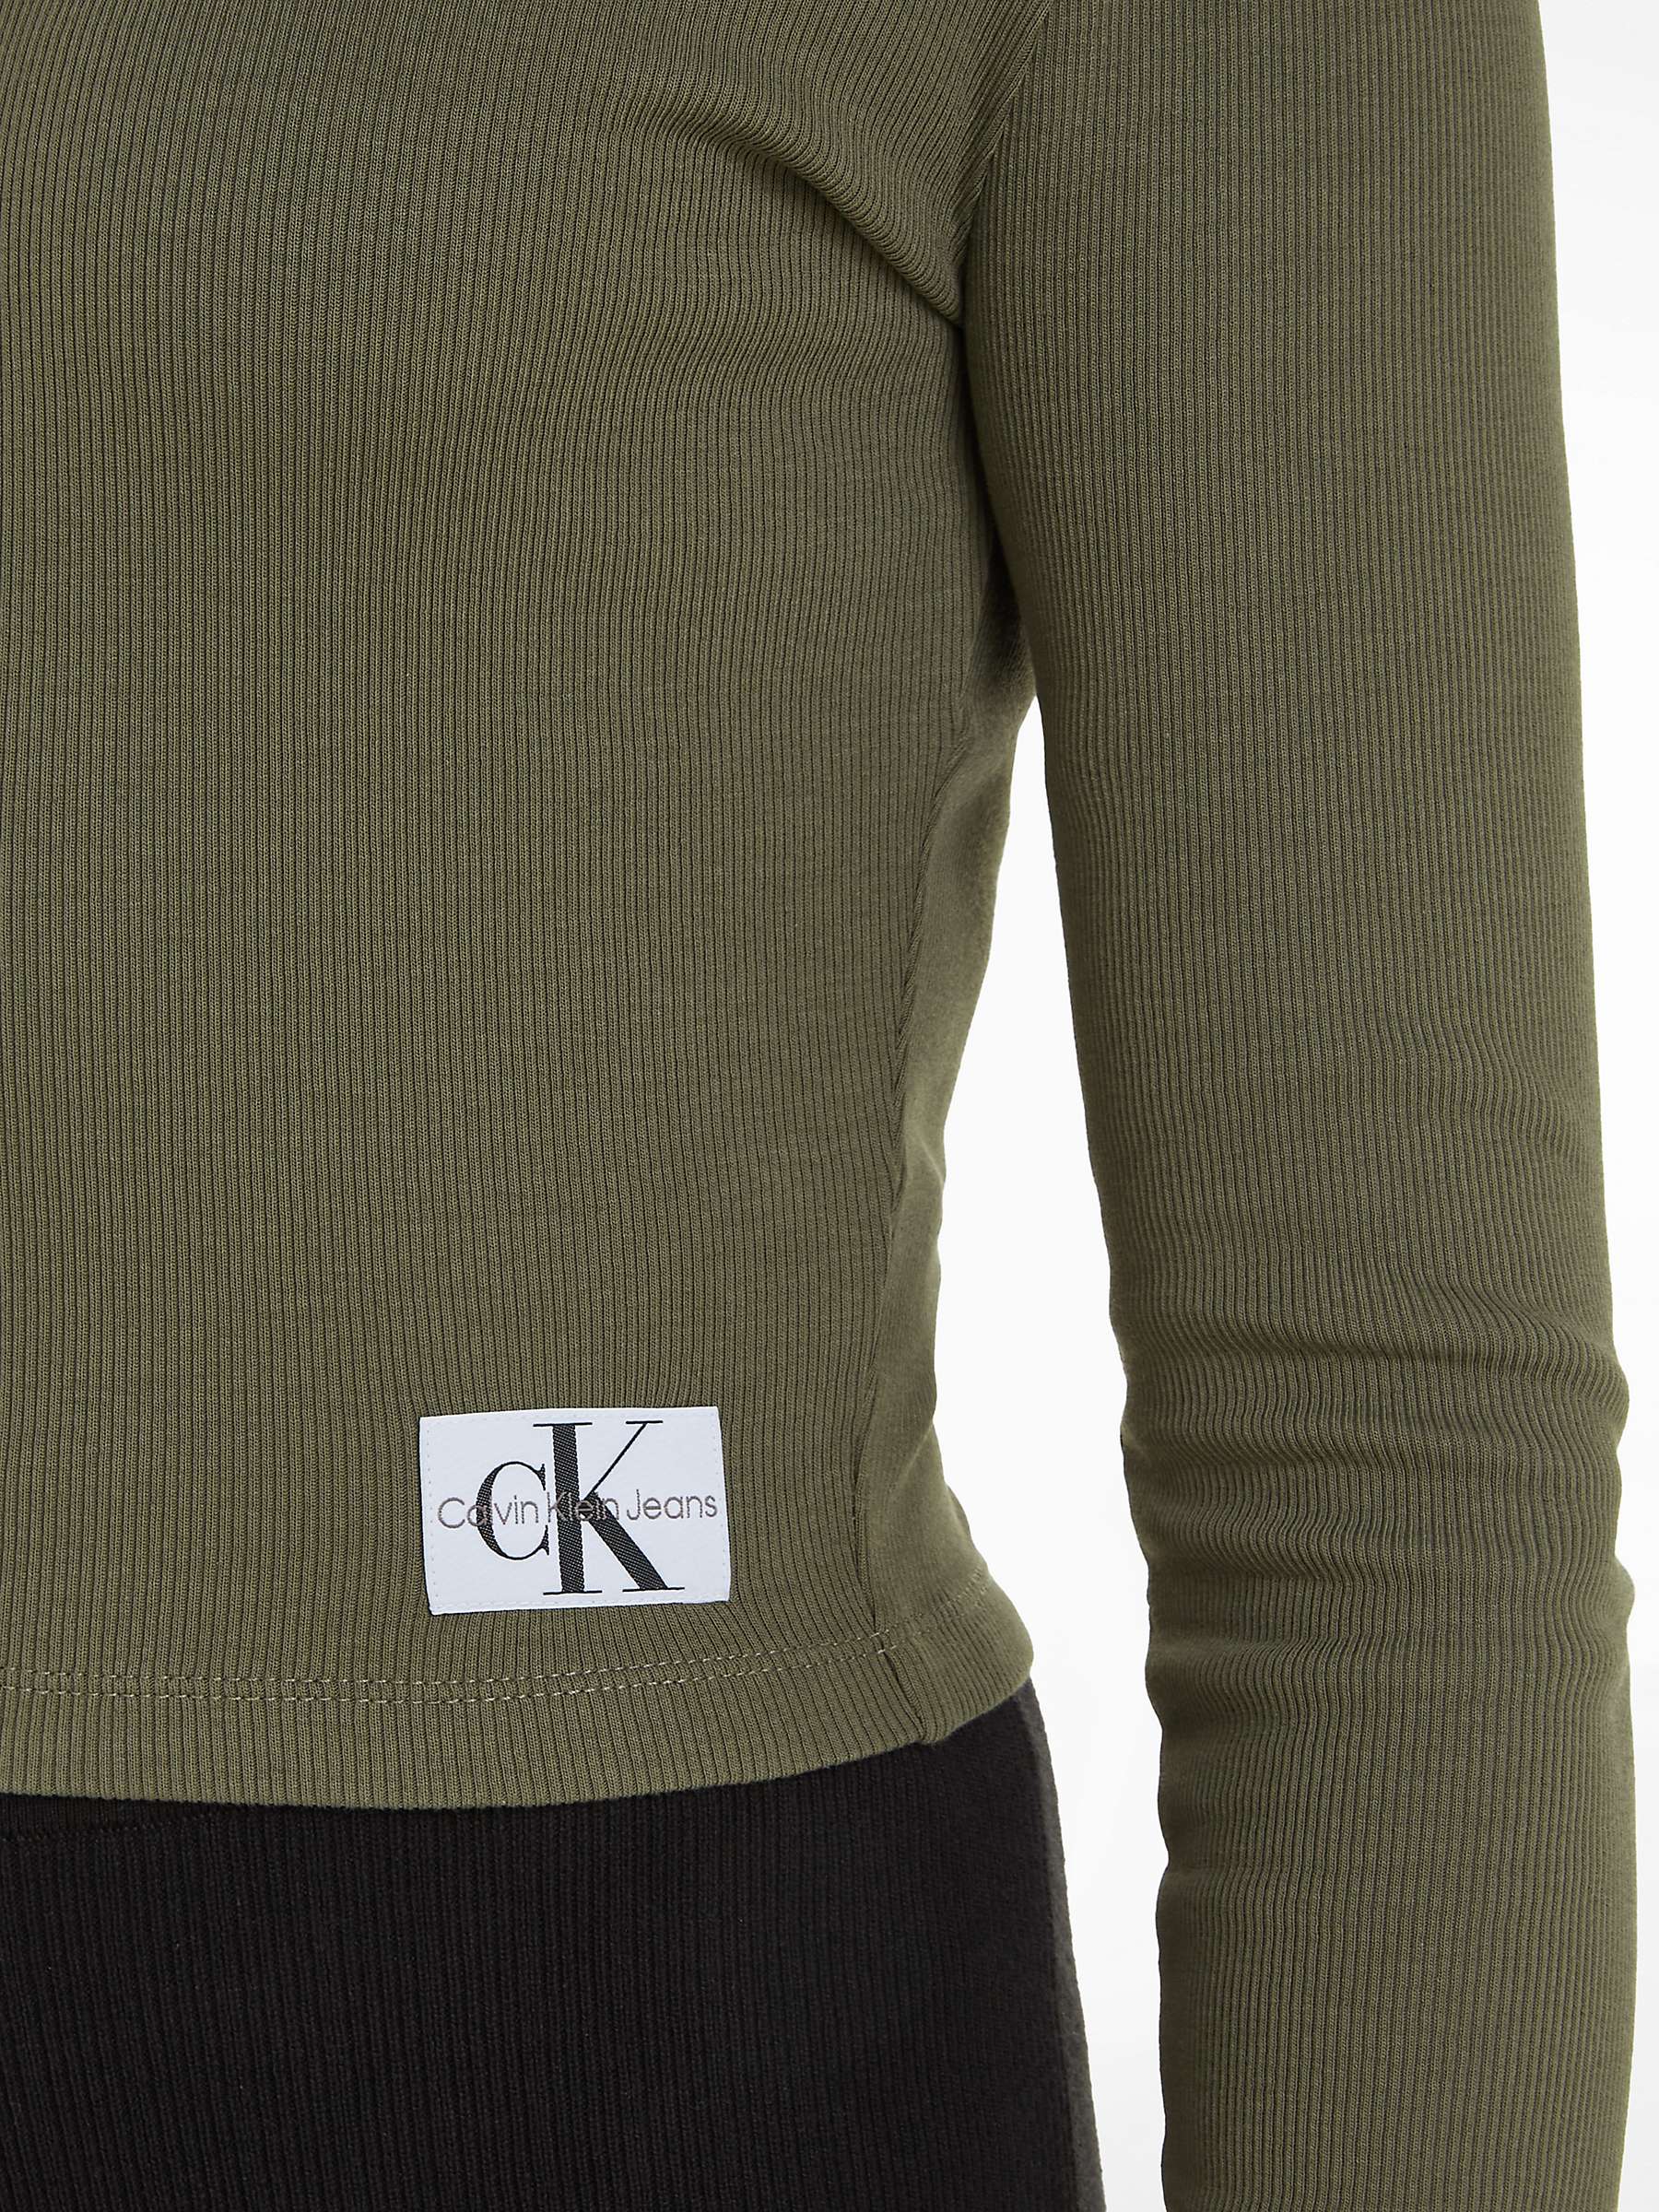 Buy Calvin Klein Jeans Woven Label Cardigan, Dusty Olive Online at johnlewis.com